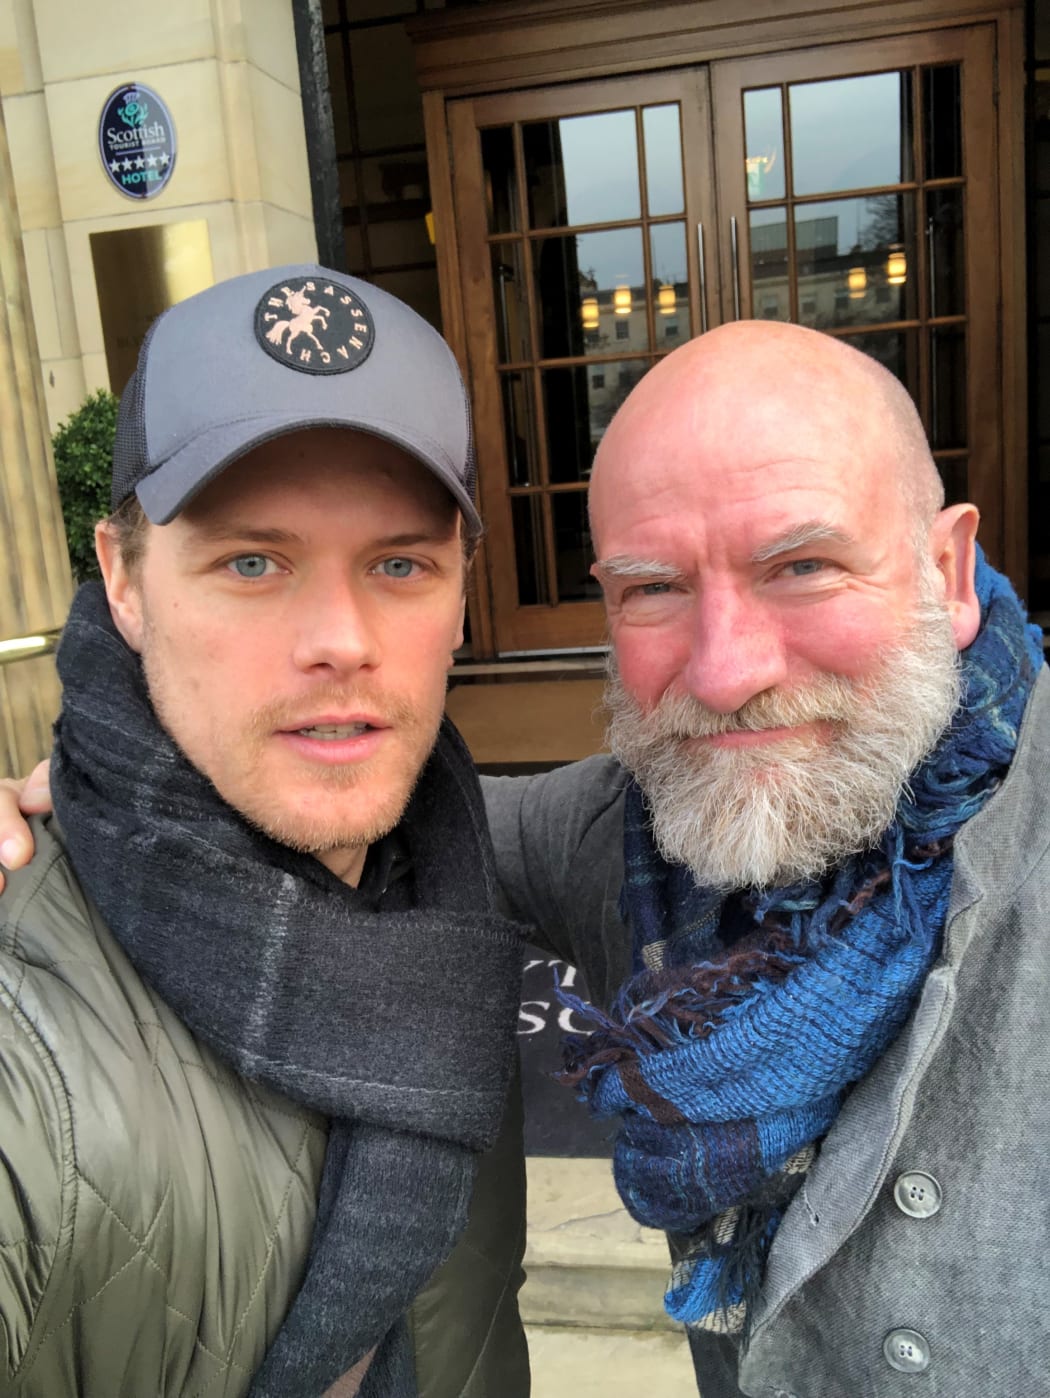 Clanlands authors and Outlander co-stars Sam Heighan (left) and Graham McTavish, who is based in Wellington, New Zealand.